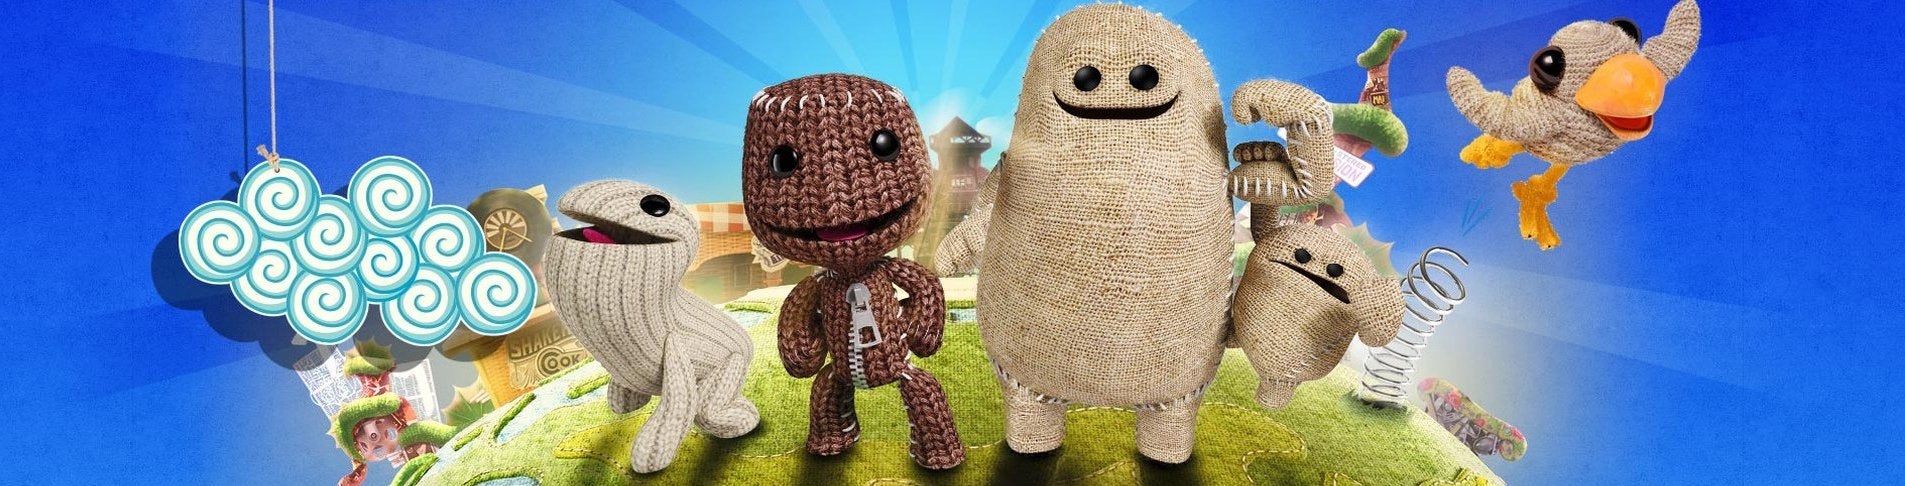 Image for LittleBigPlanet 3 review